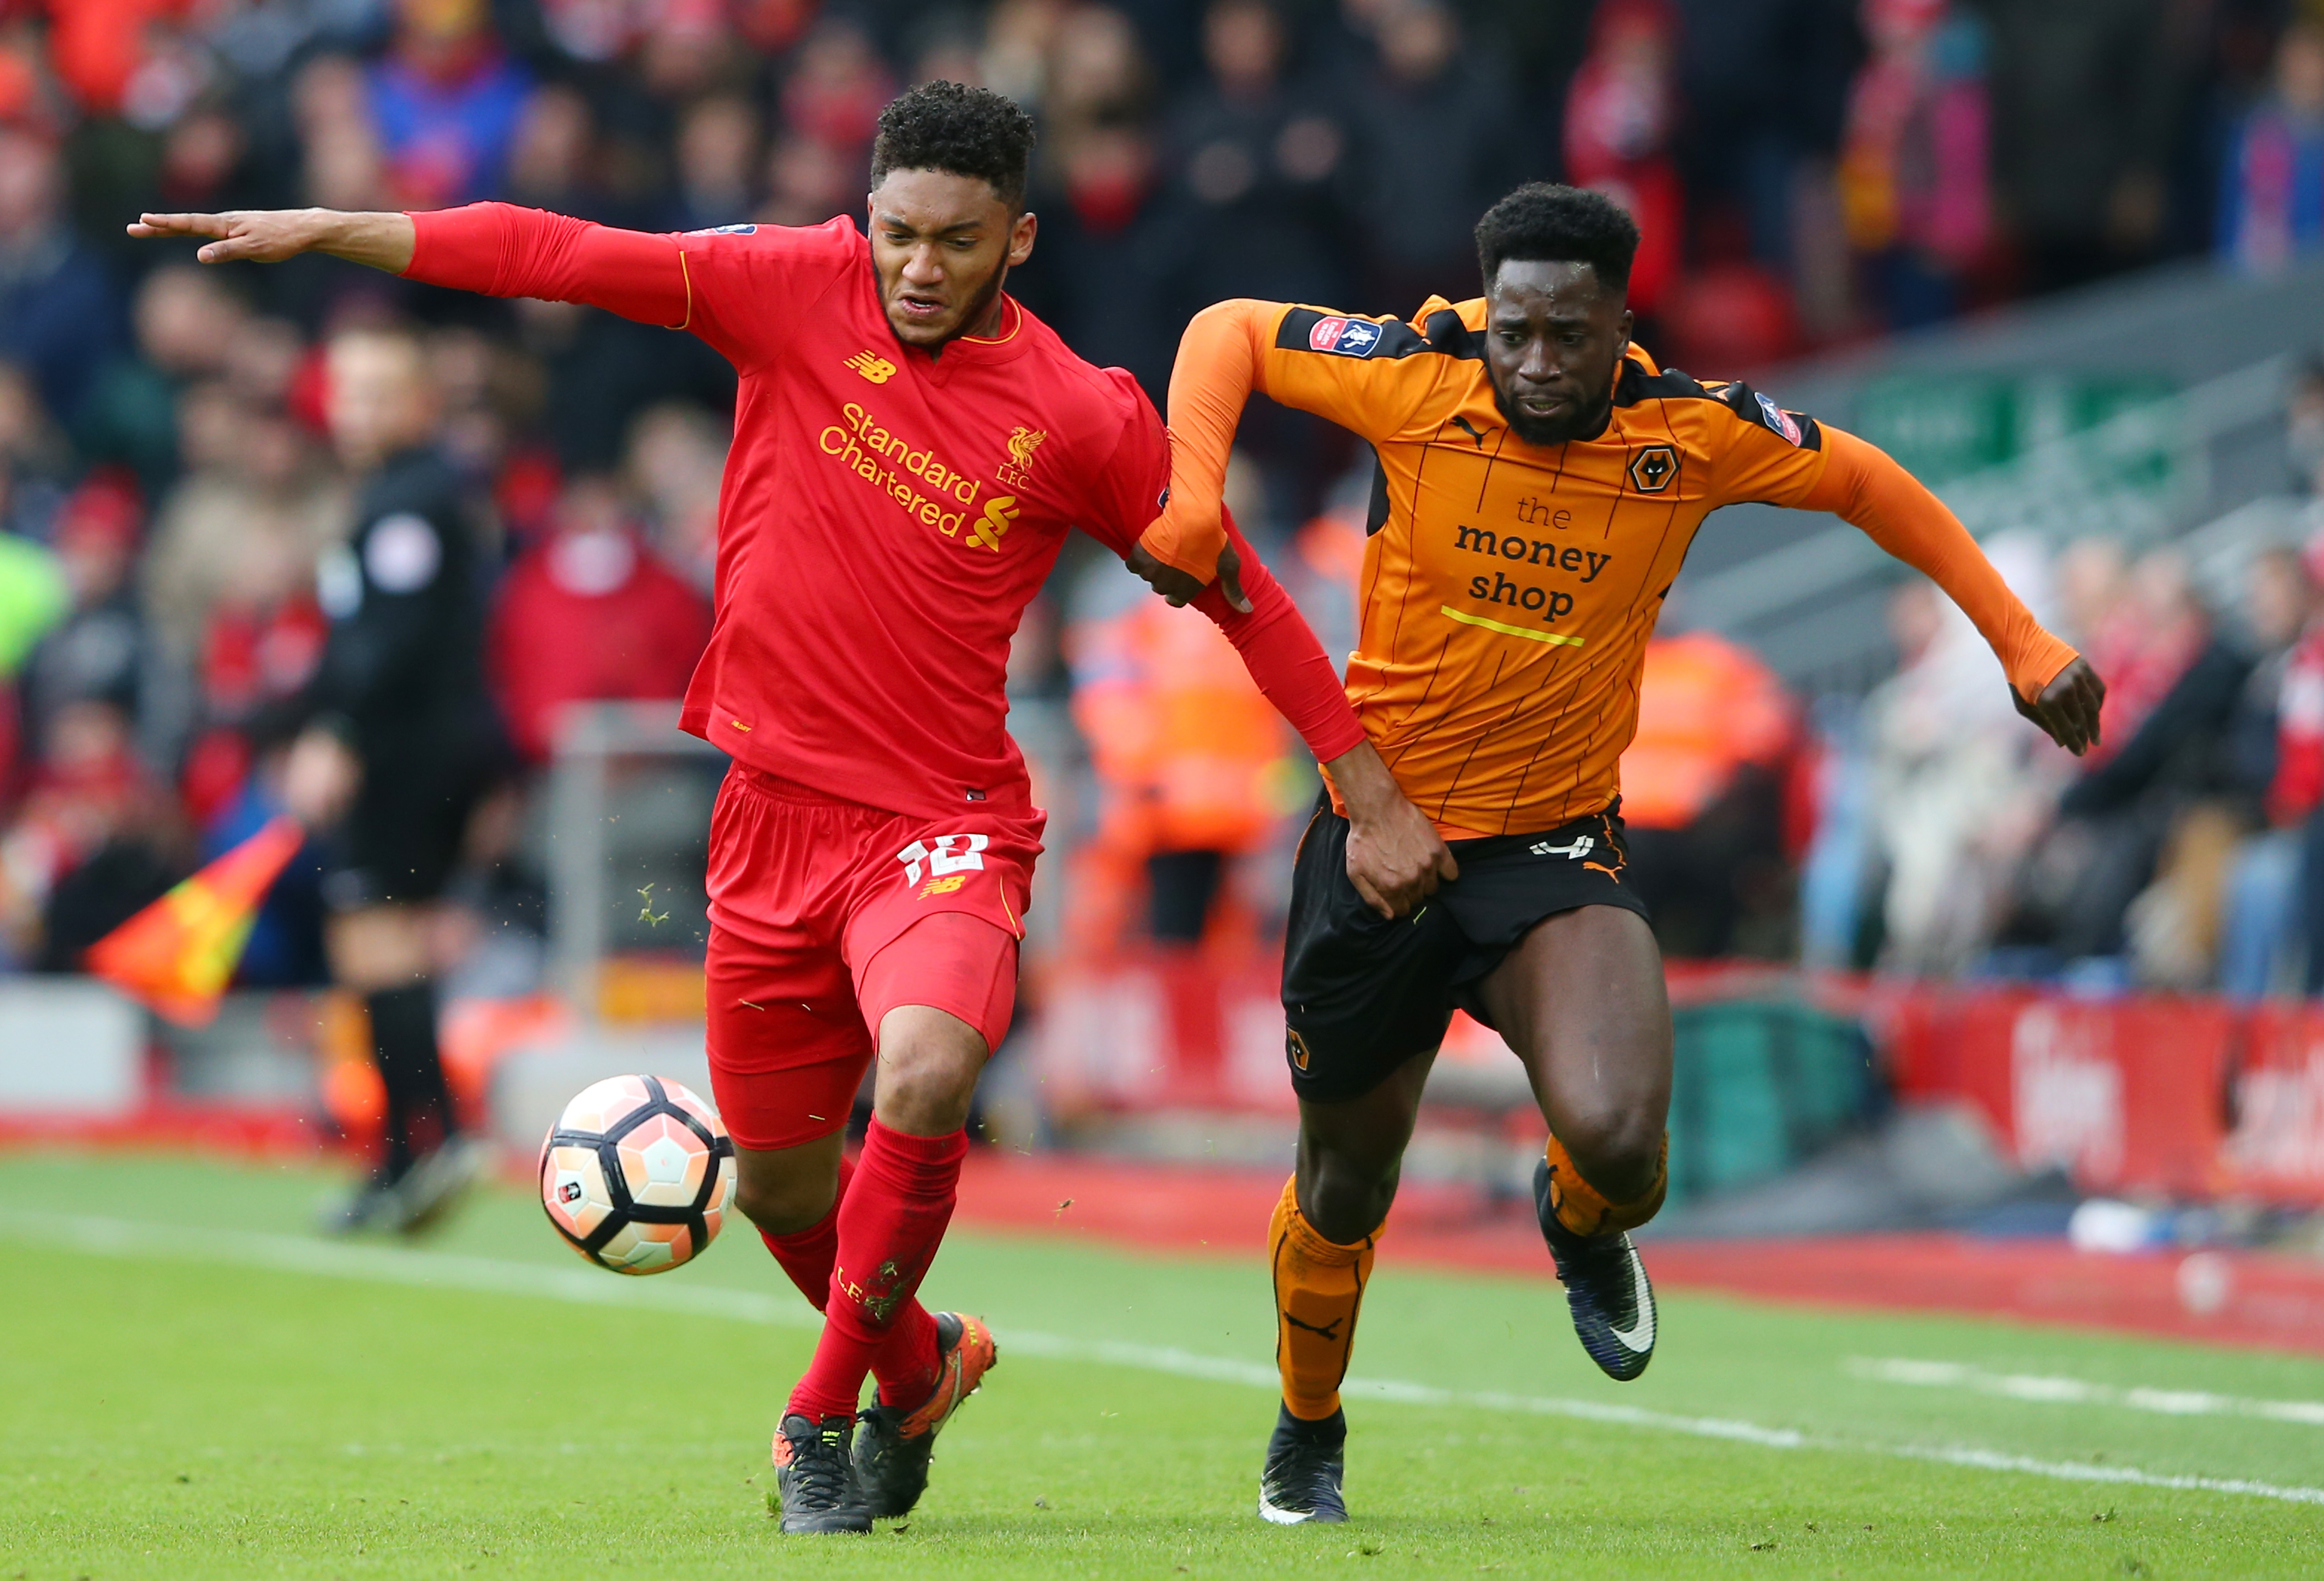 LIVERPOOL, ENGLAND - JANUARY 28:  Joe Gomez of Liverpool and Nouha Dicko of Wolverhampton Wanderers compete for the ball during the Emirates FA Cup Fourth Round match between Liverpool and Wolverhampton Wanderers at Anfield on January 28, 2017 in Liverpool, England.  (Photo by Alex Livesey/Getty Images)